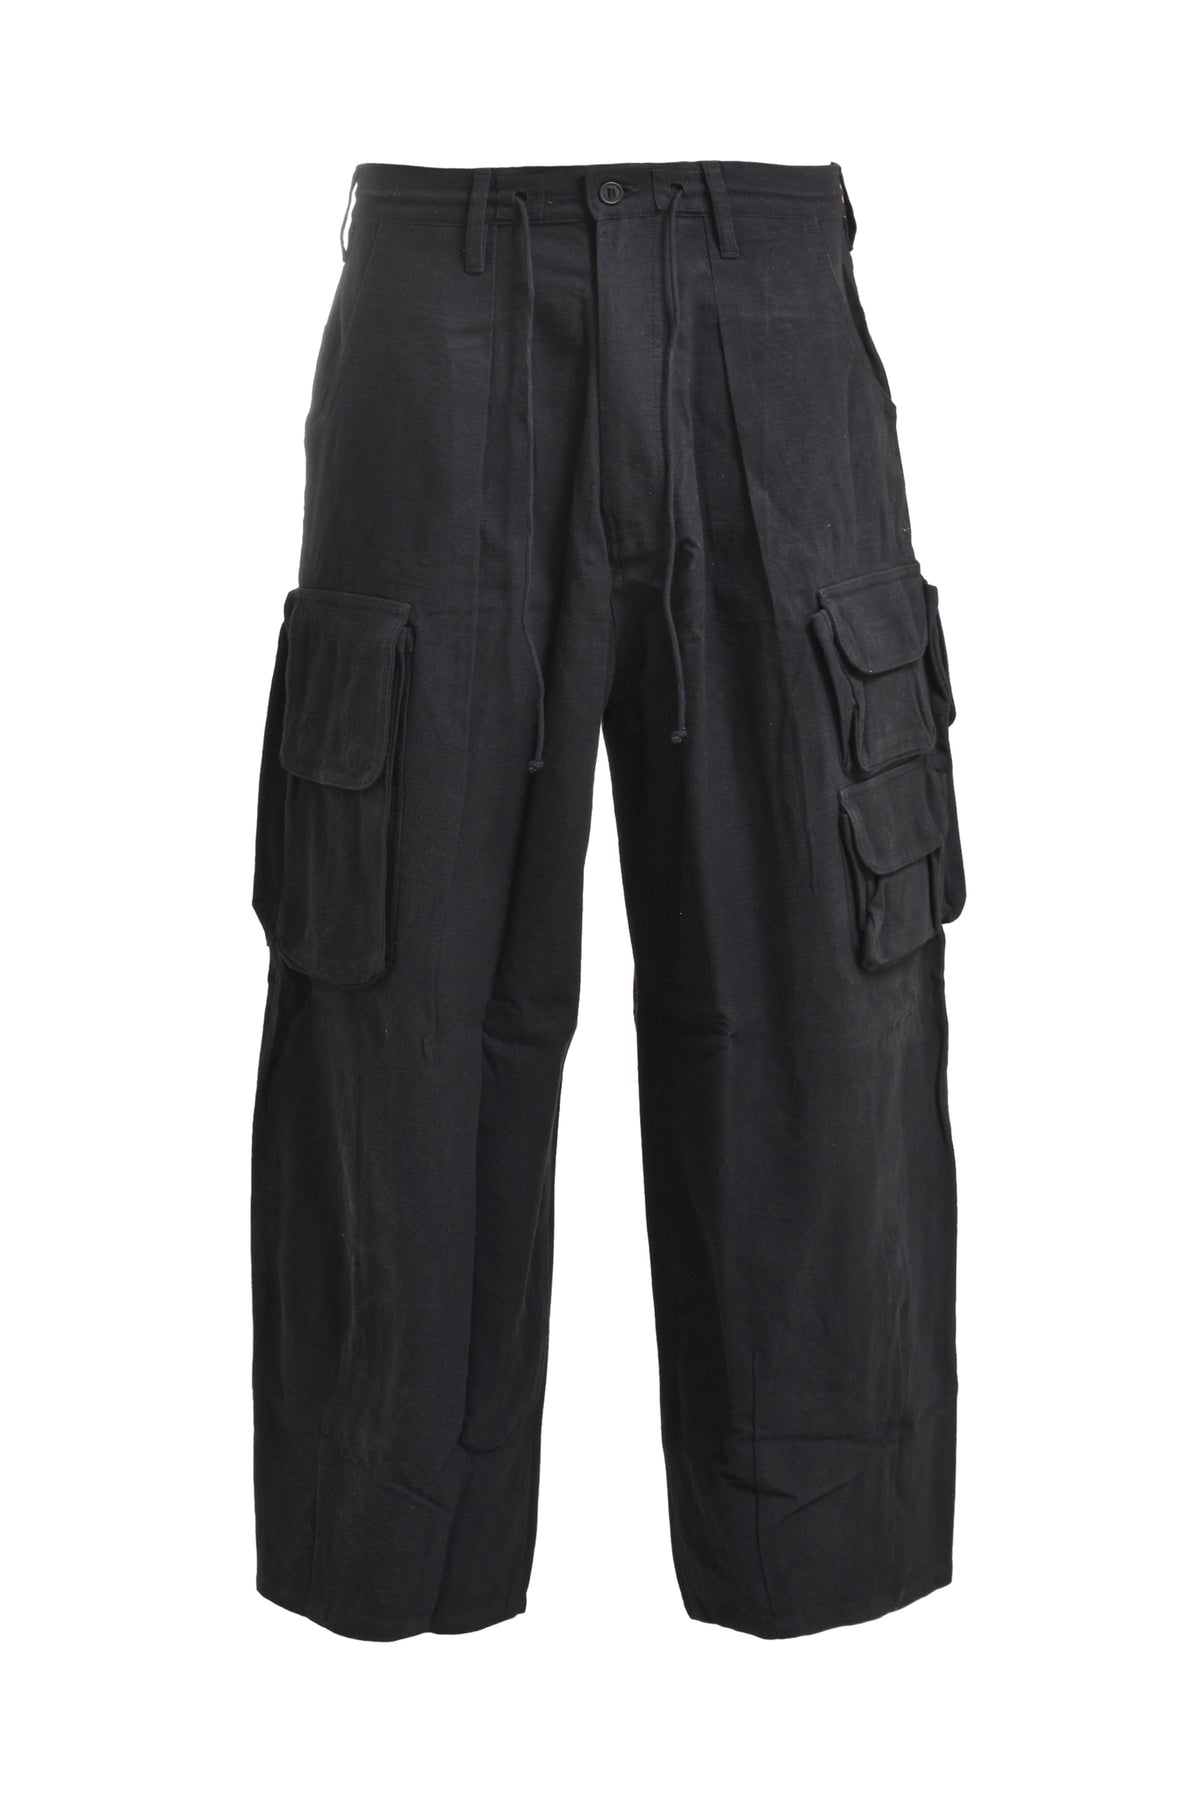 STORY mfg. FORAGER PANTS / BLK